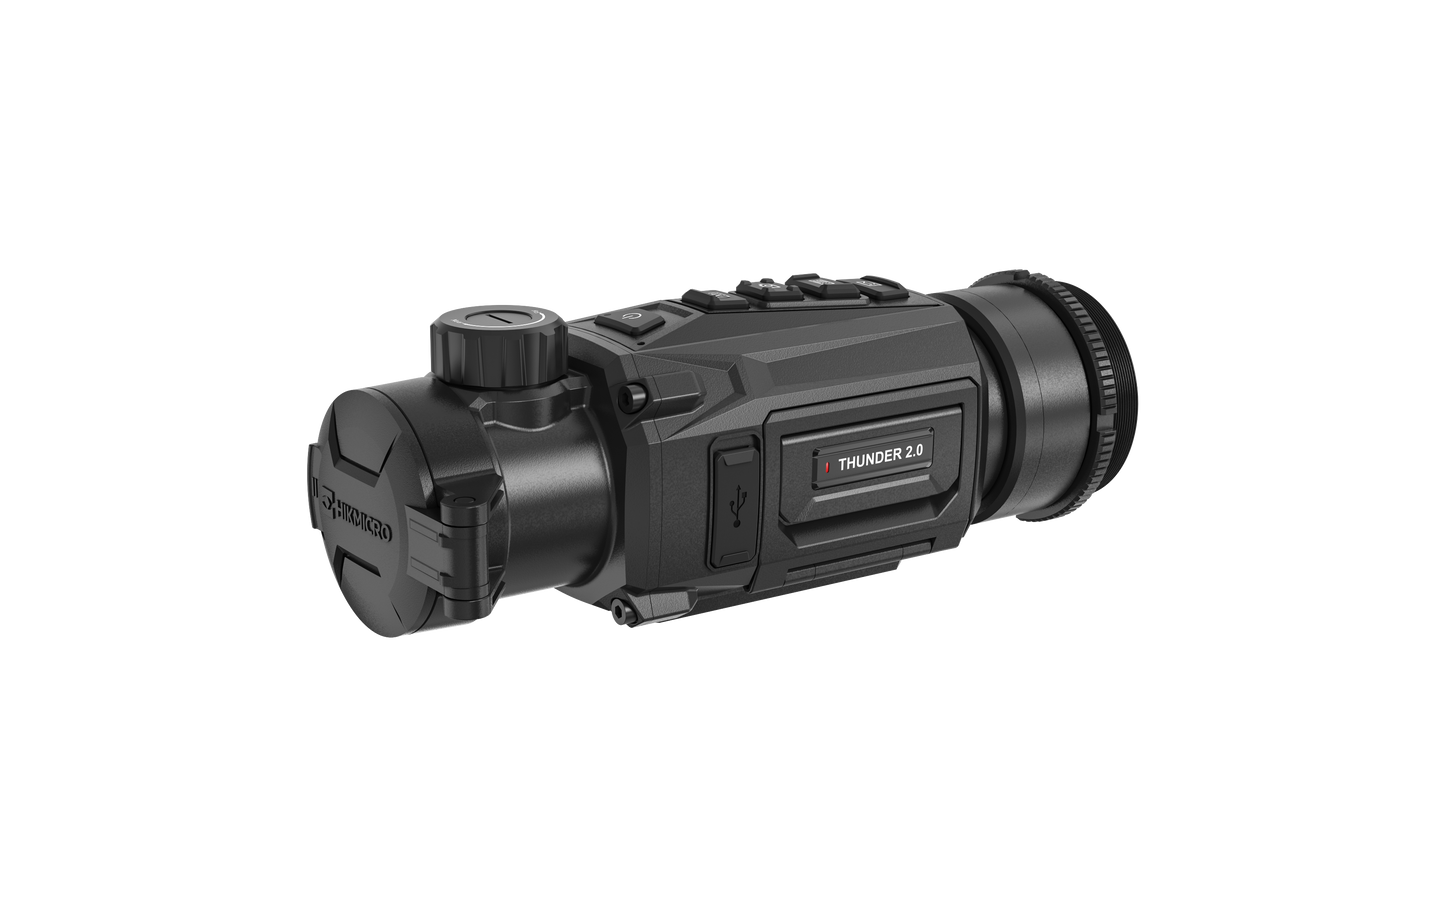 HIKMICRO Thunder TH35 2.0 Thermal Scope